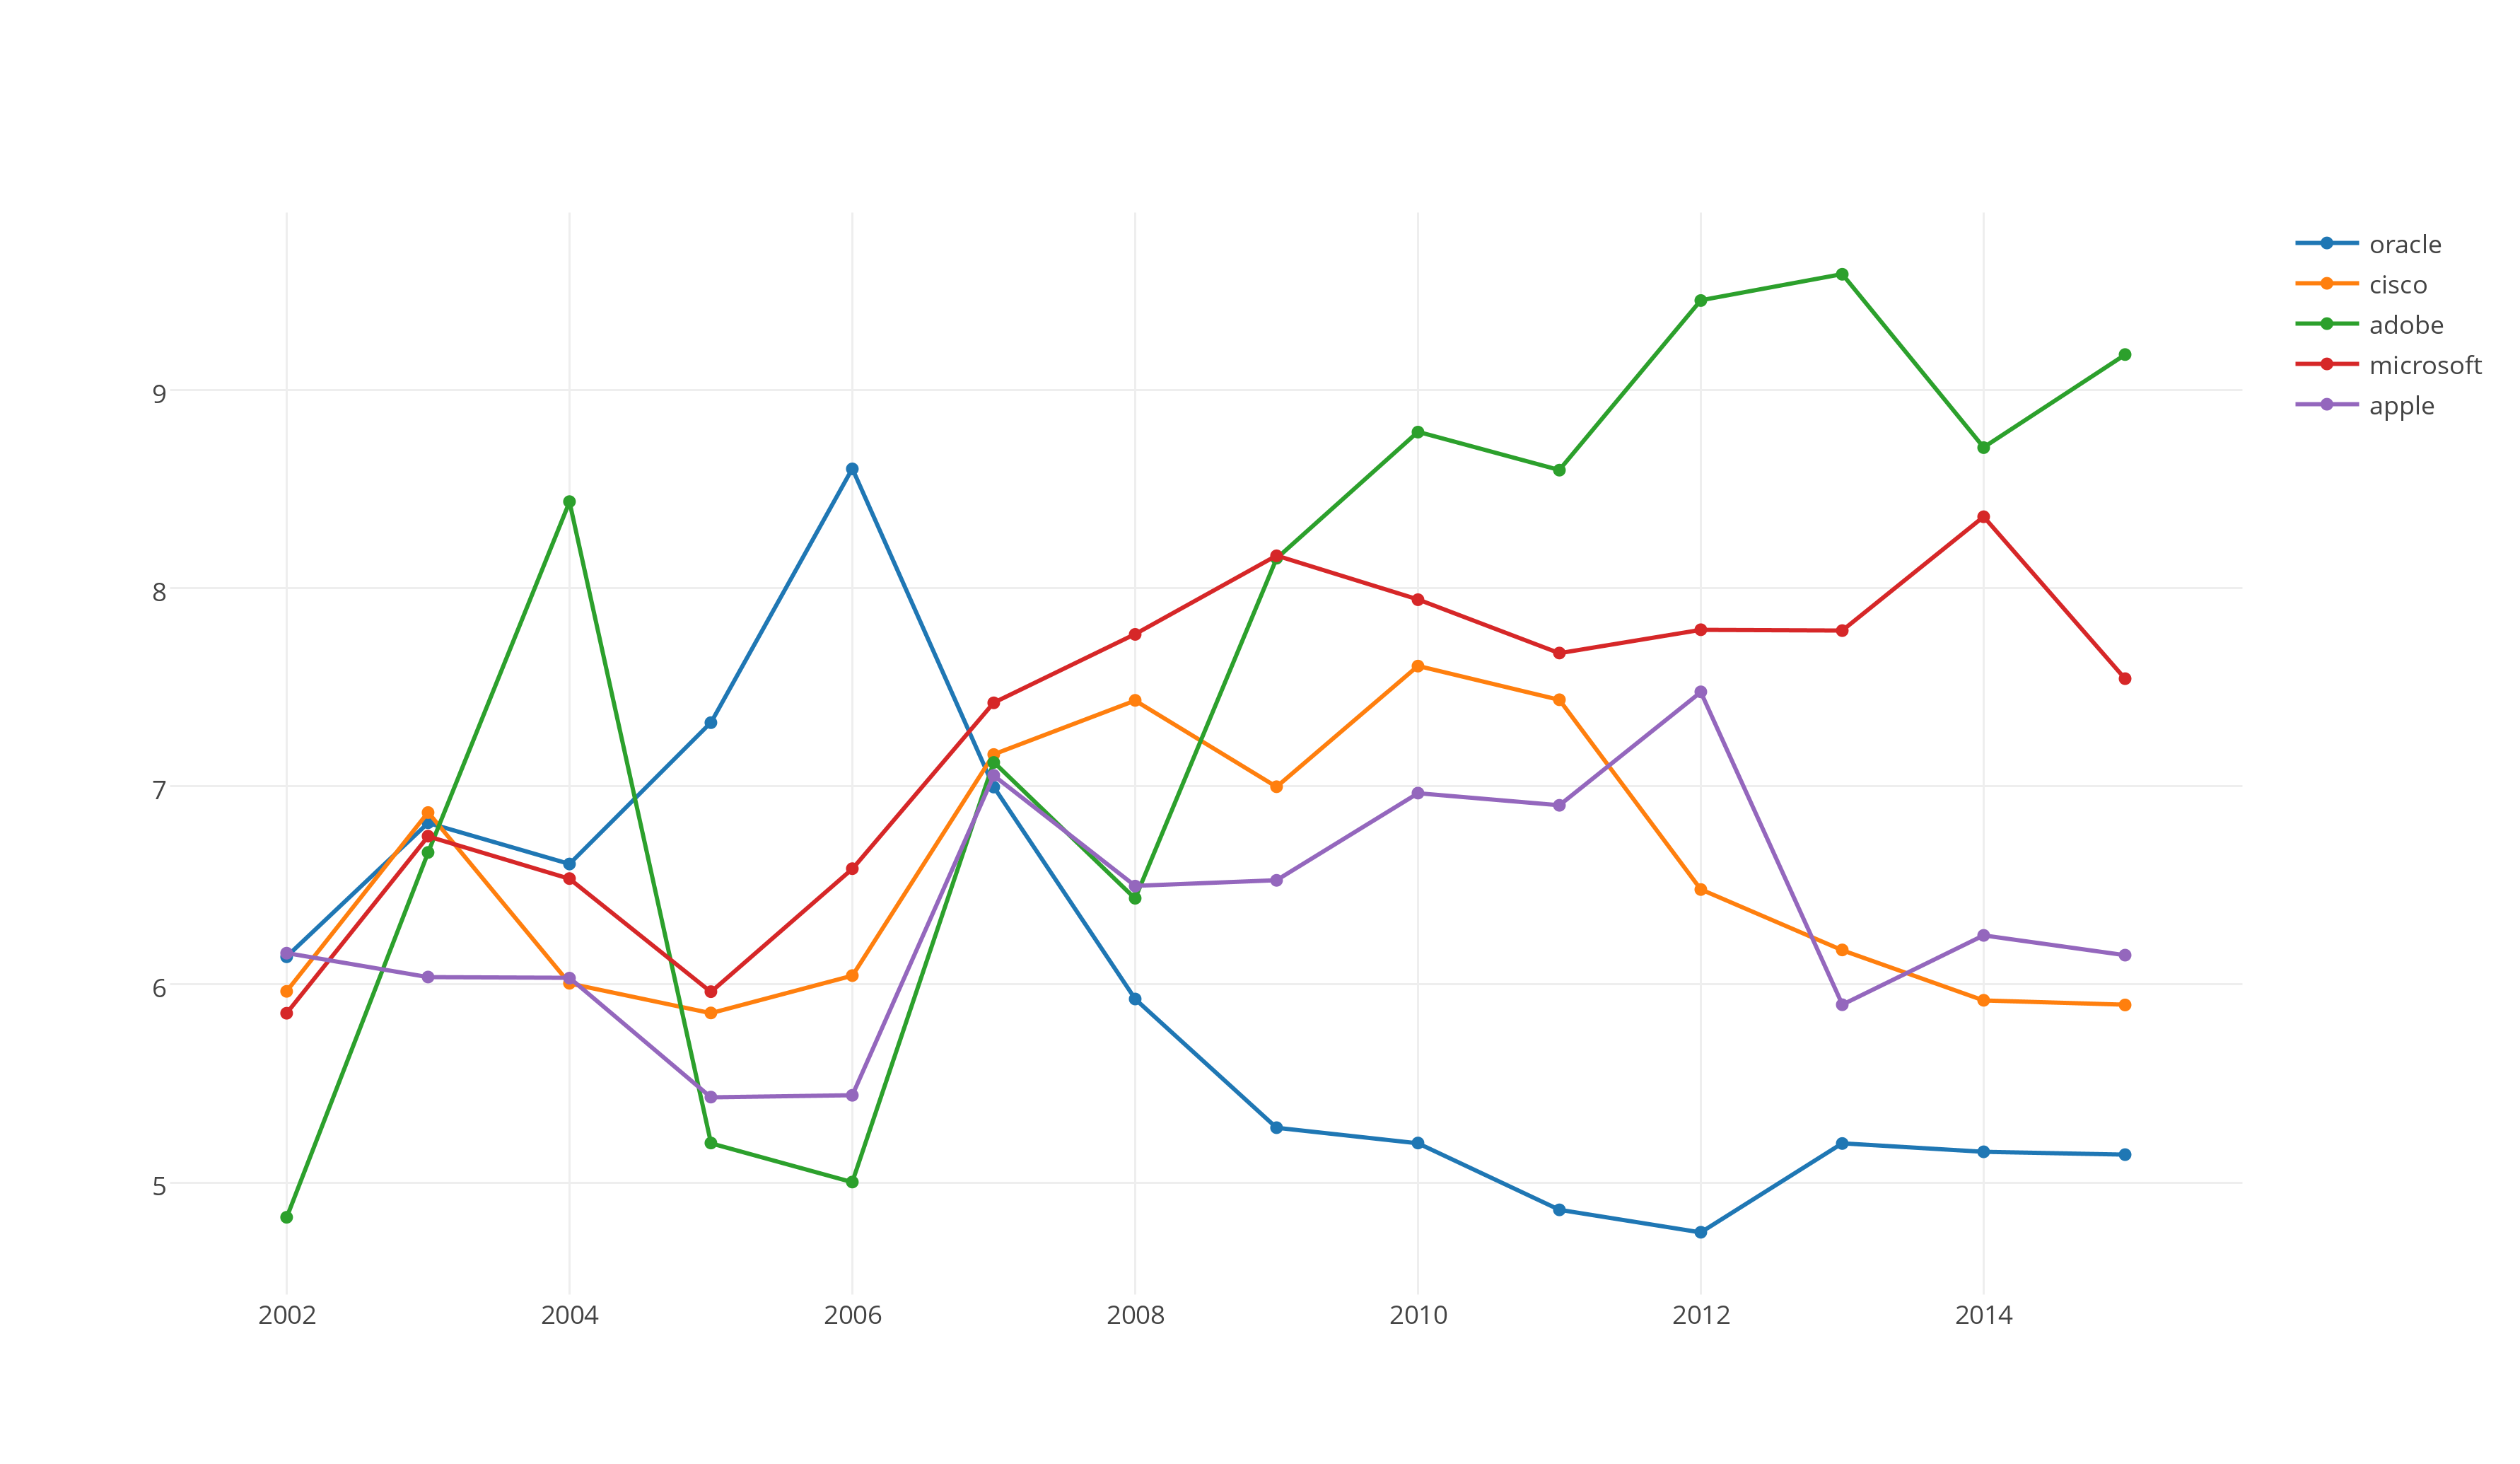 CVE of Adobe, Microsoft, Apple, Cisco and Oracle from 2002 to 2015 based on average score